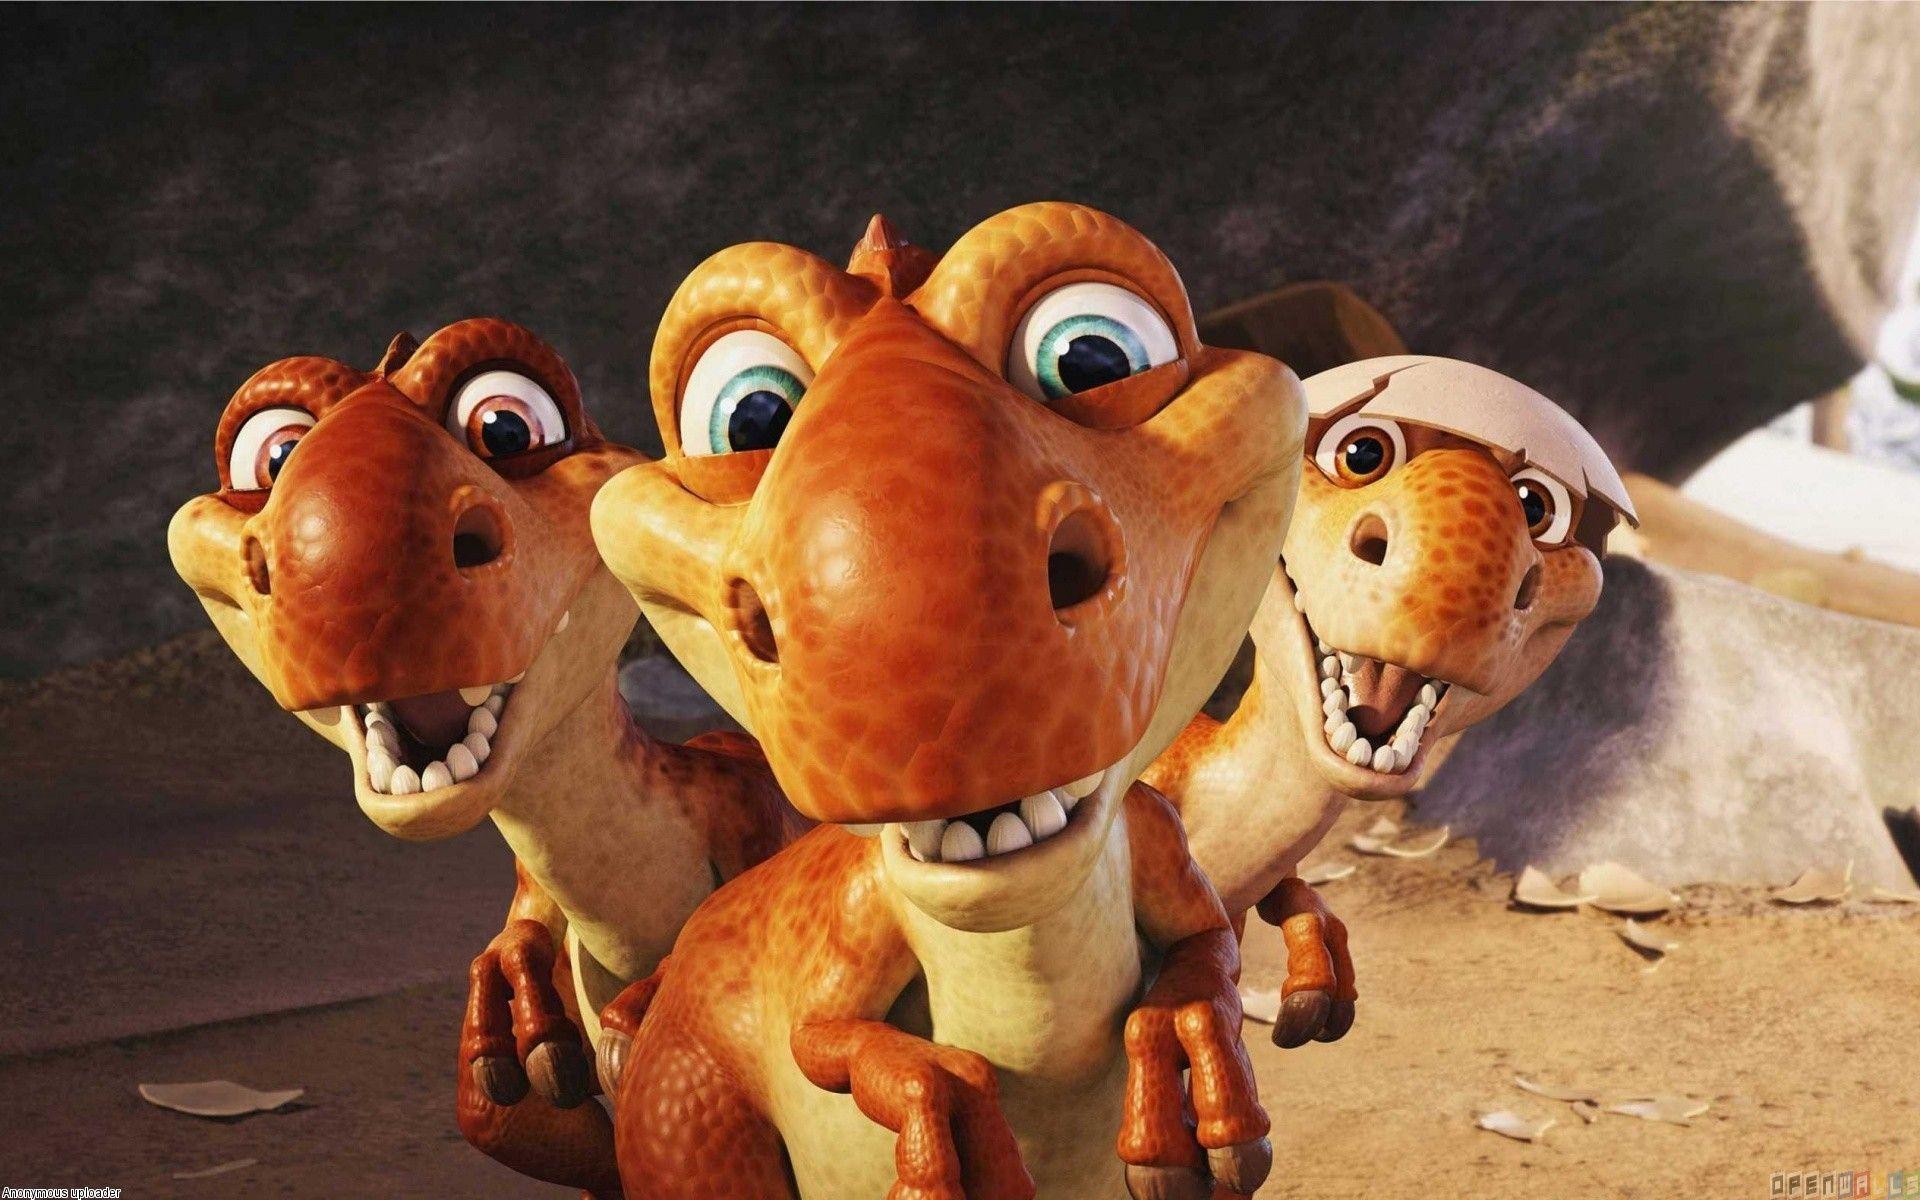 Ice Age 3 Dinosaurs HD Image Wallpaper for Mac